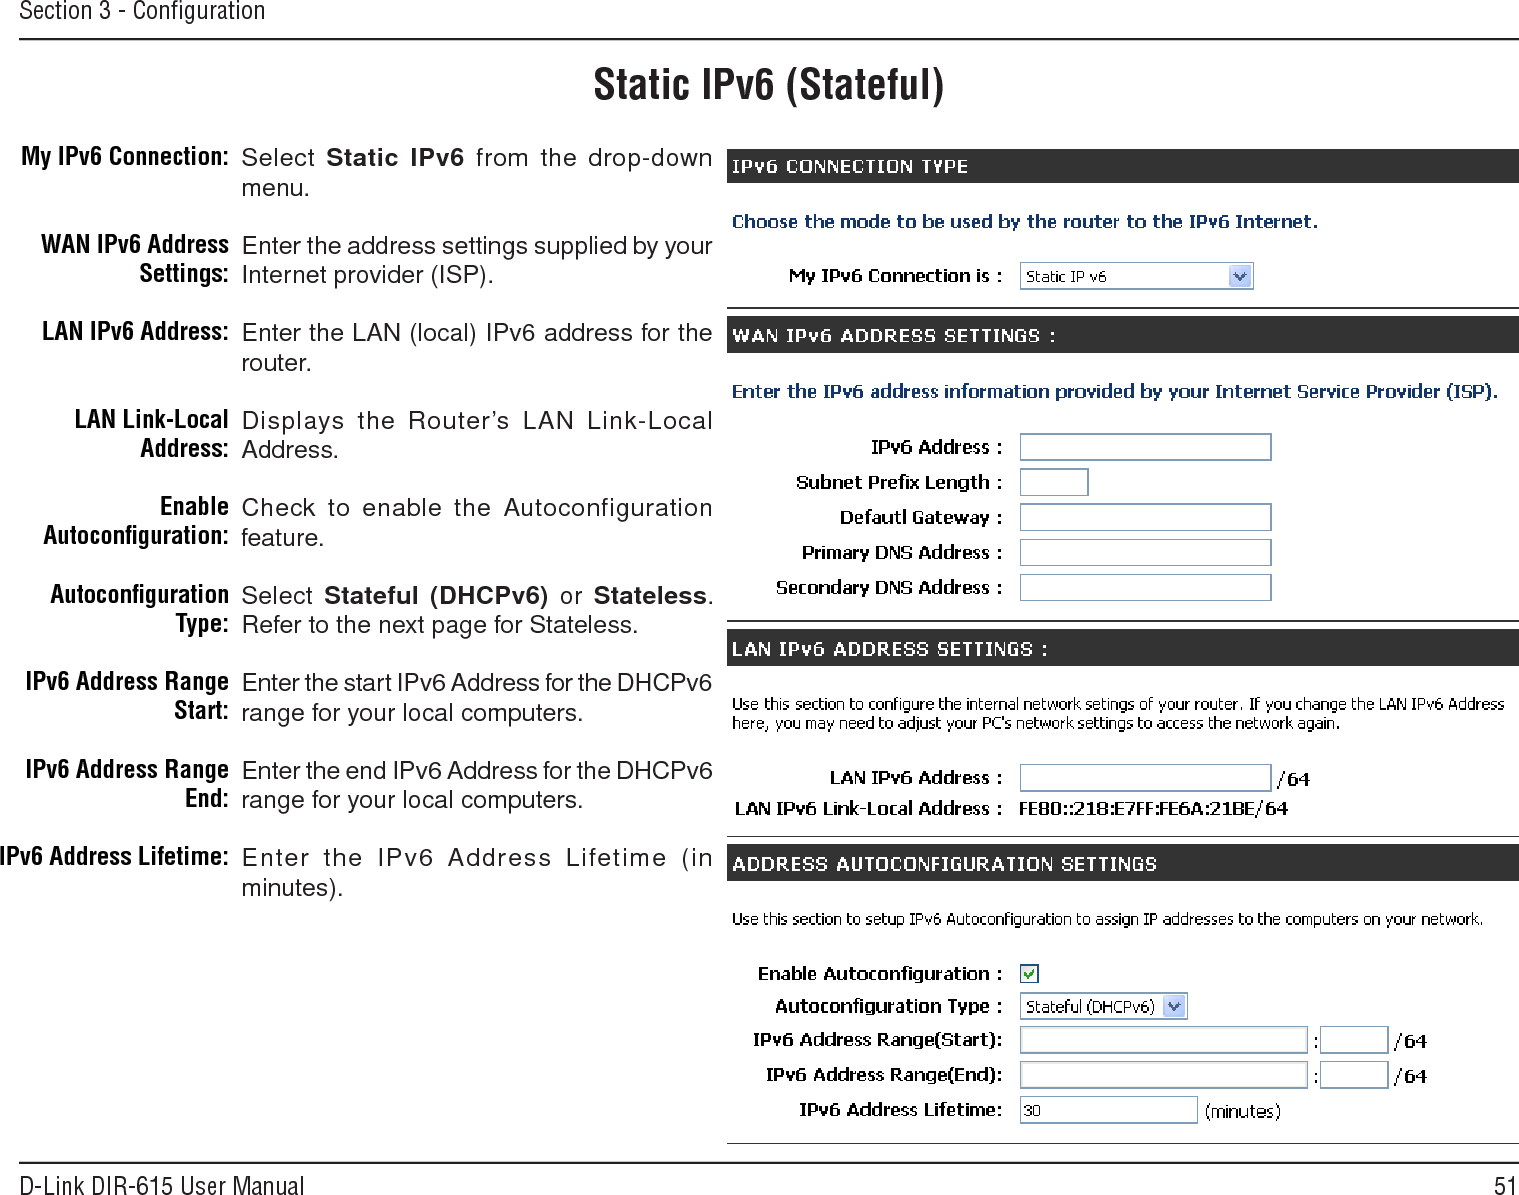 51D-Link DIR-615 User ManualSection 3 - ConﬁgurationStatic IPv6 (Stateful)Select Static.IPv6 from the drop-down menu.Enter the address settings supplied by your Internet provider (ISP). Enter the LAN (local) IPv6 address for the router. Displays the Router’s LAN Link-Local Address.Check to enable the  Autoconfiguration feature.Select Stateful.(DHCPv6)  or  Stateless. Refer to the next page for Stateless.Enter the start IPv6 Address for the DHCPv6 range for your local computers.Enter the end IPv6 Address for the DHCPv6 range for your local computers.Enter  the  IPv6 Address  Lifetime  (in minutes).My IPv6 Connection:WAN IPv6 Address Settings:LAN IPv6 Address:LAN Link-Local Address:Enable Autoconﬁguration:Autoconﬁguration Type:IPv6 Address Range Start:IPv6 Address Range End:IPv6 Address Lifetime: